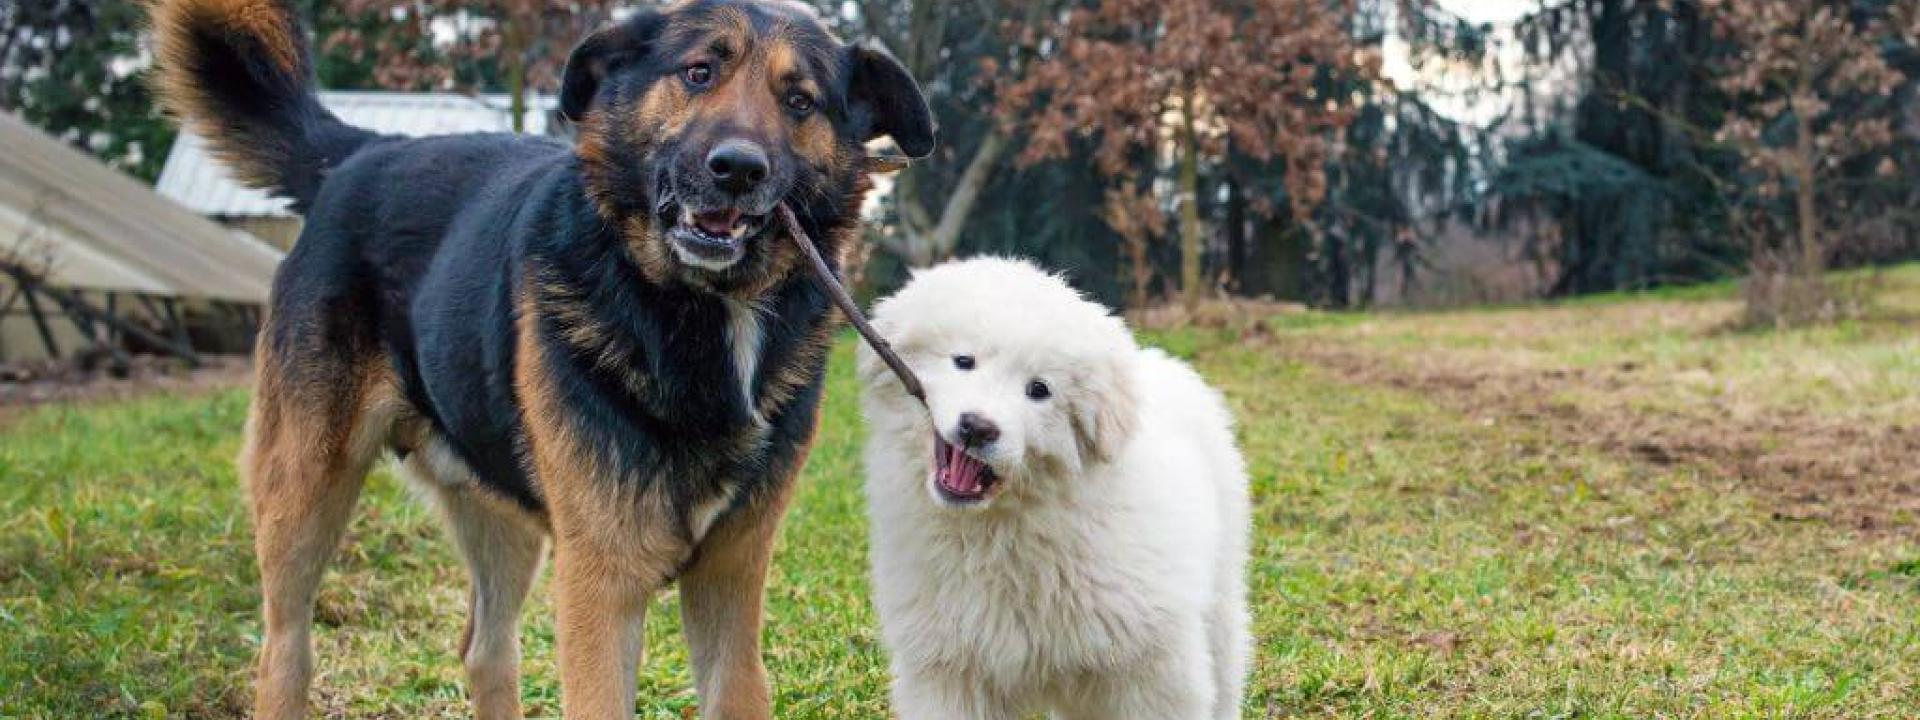 German Shepherd and Great Pyrenees playing at dog park